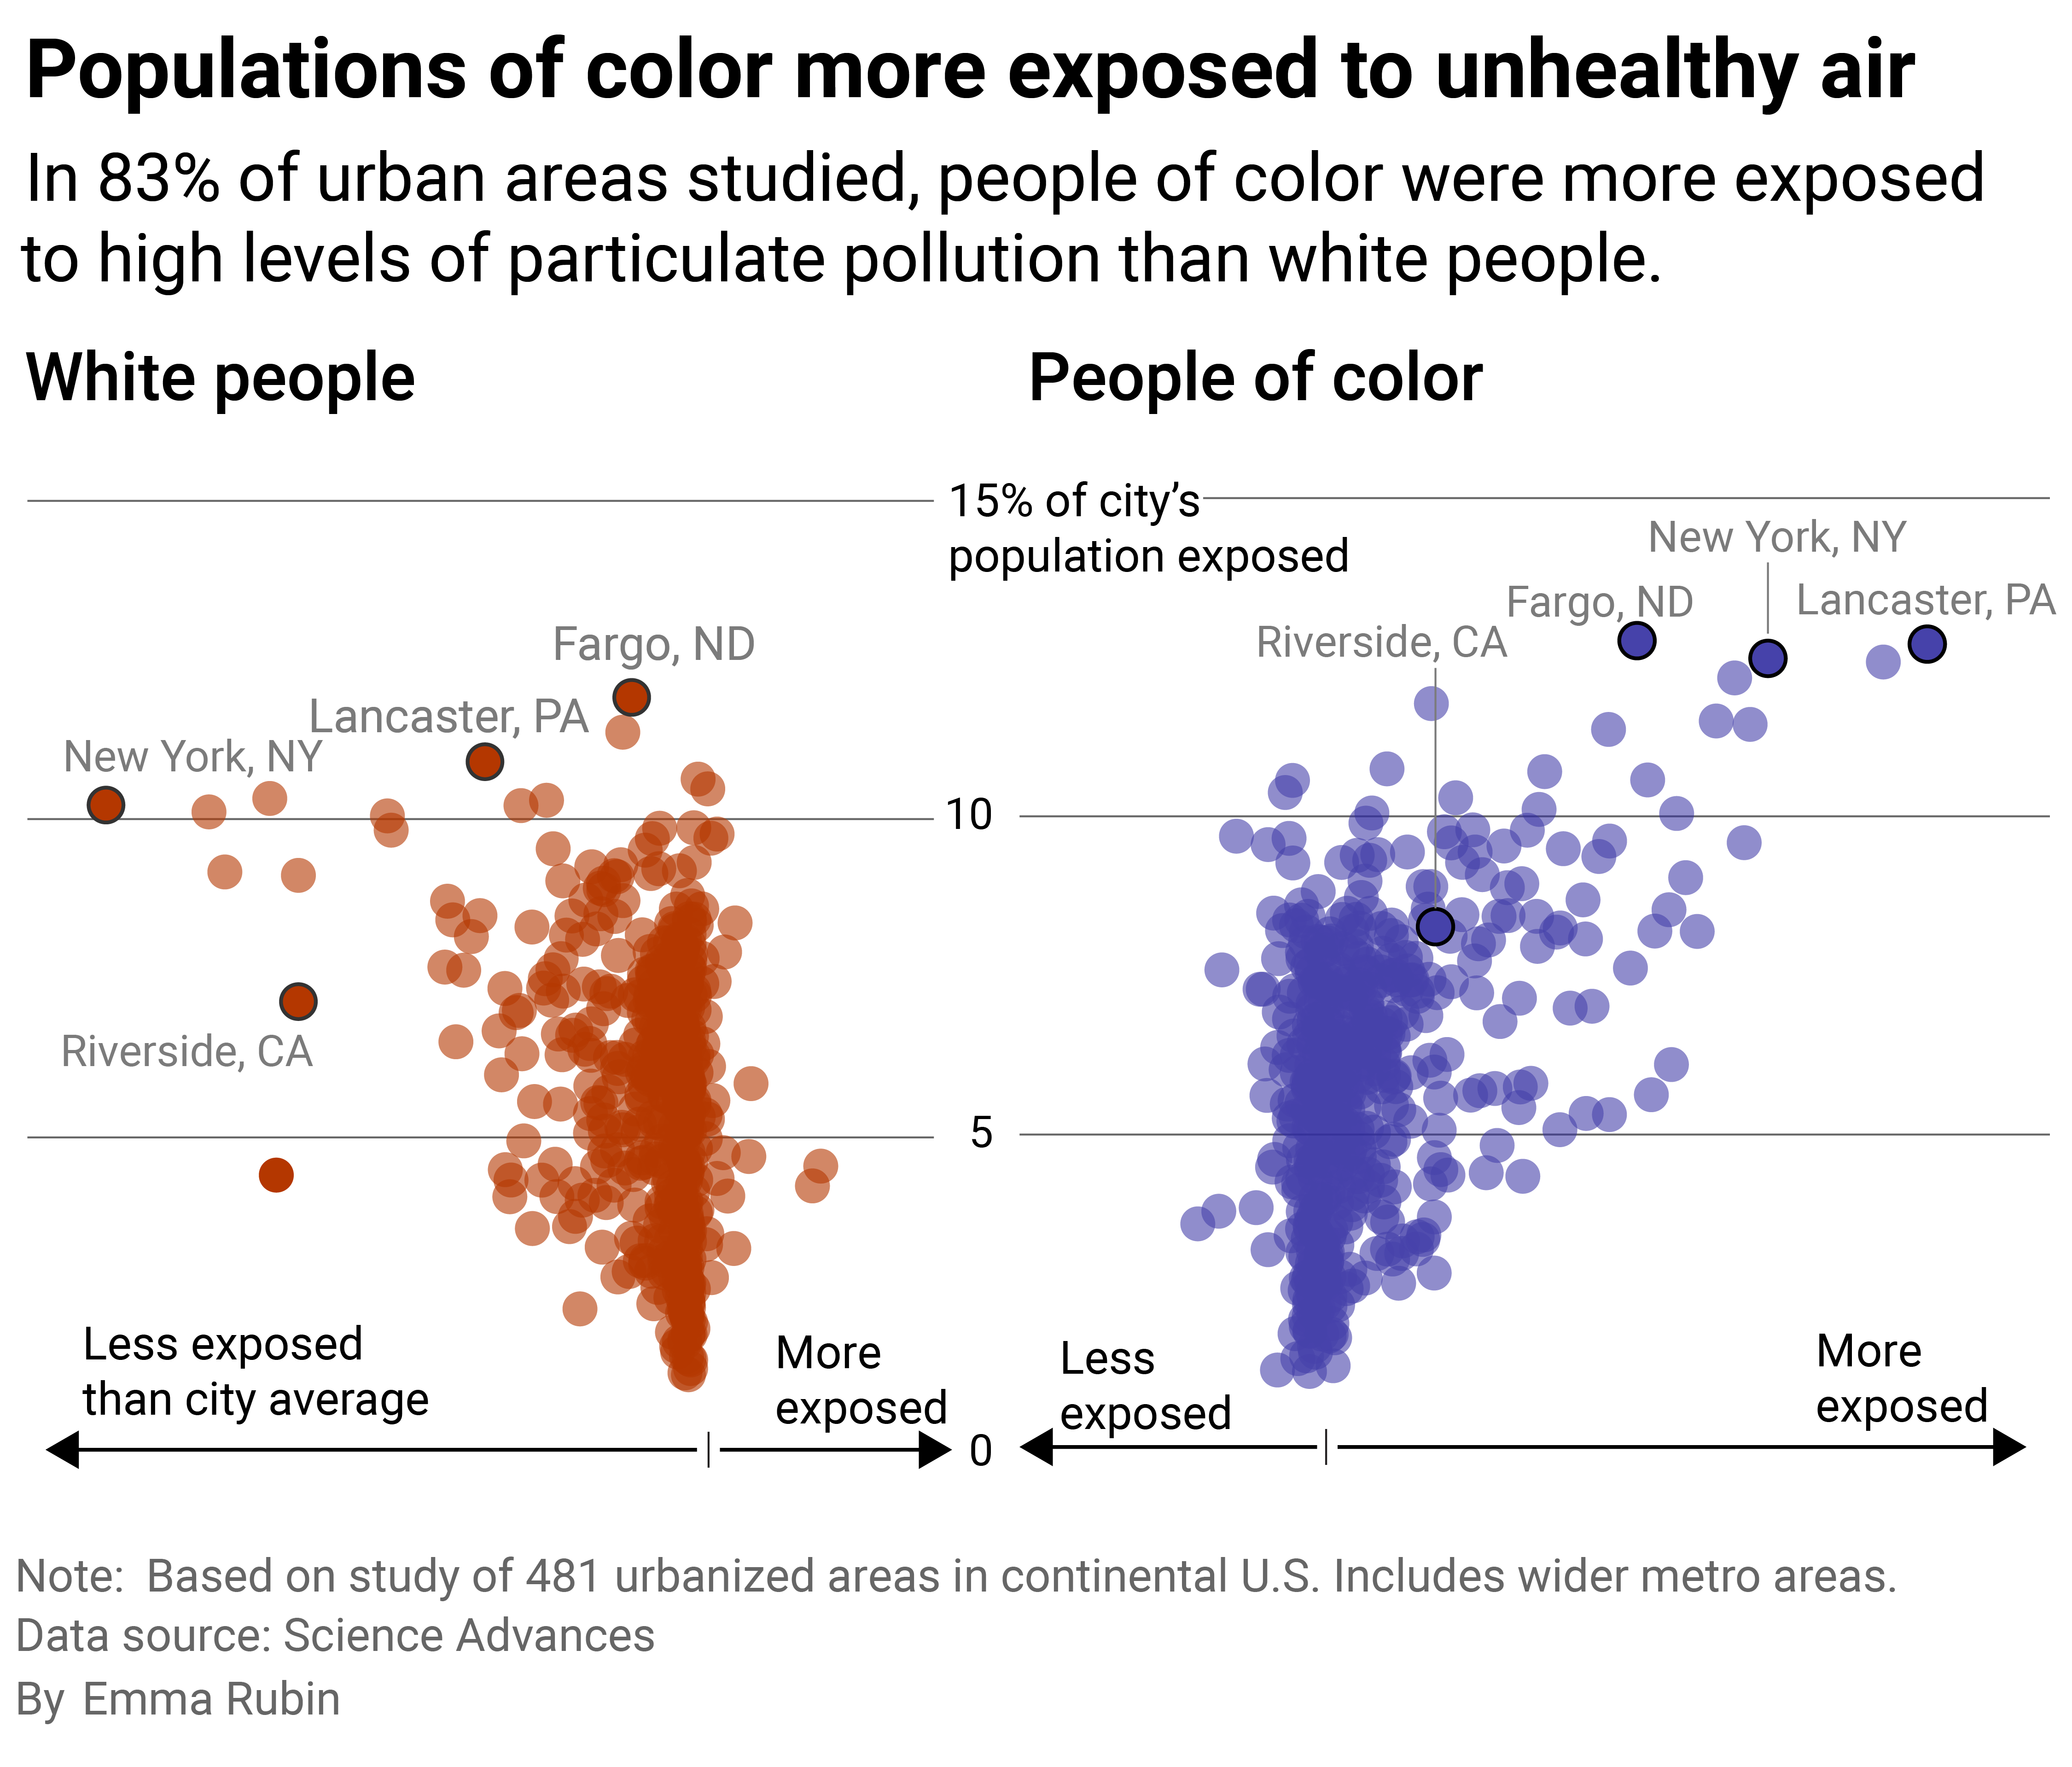 Scatter plot showing people of color in most urbanized areas are more exposed to particulate pollution.